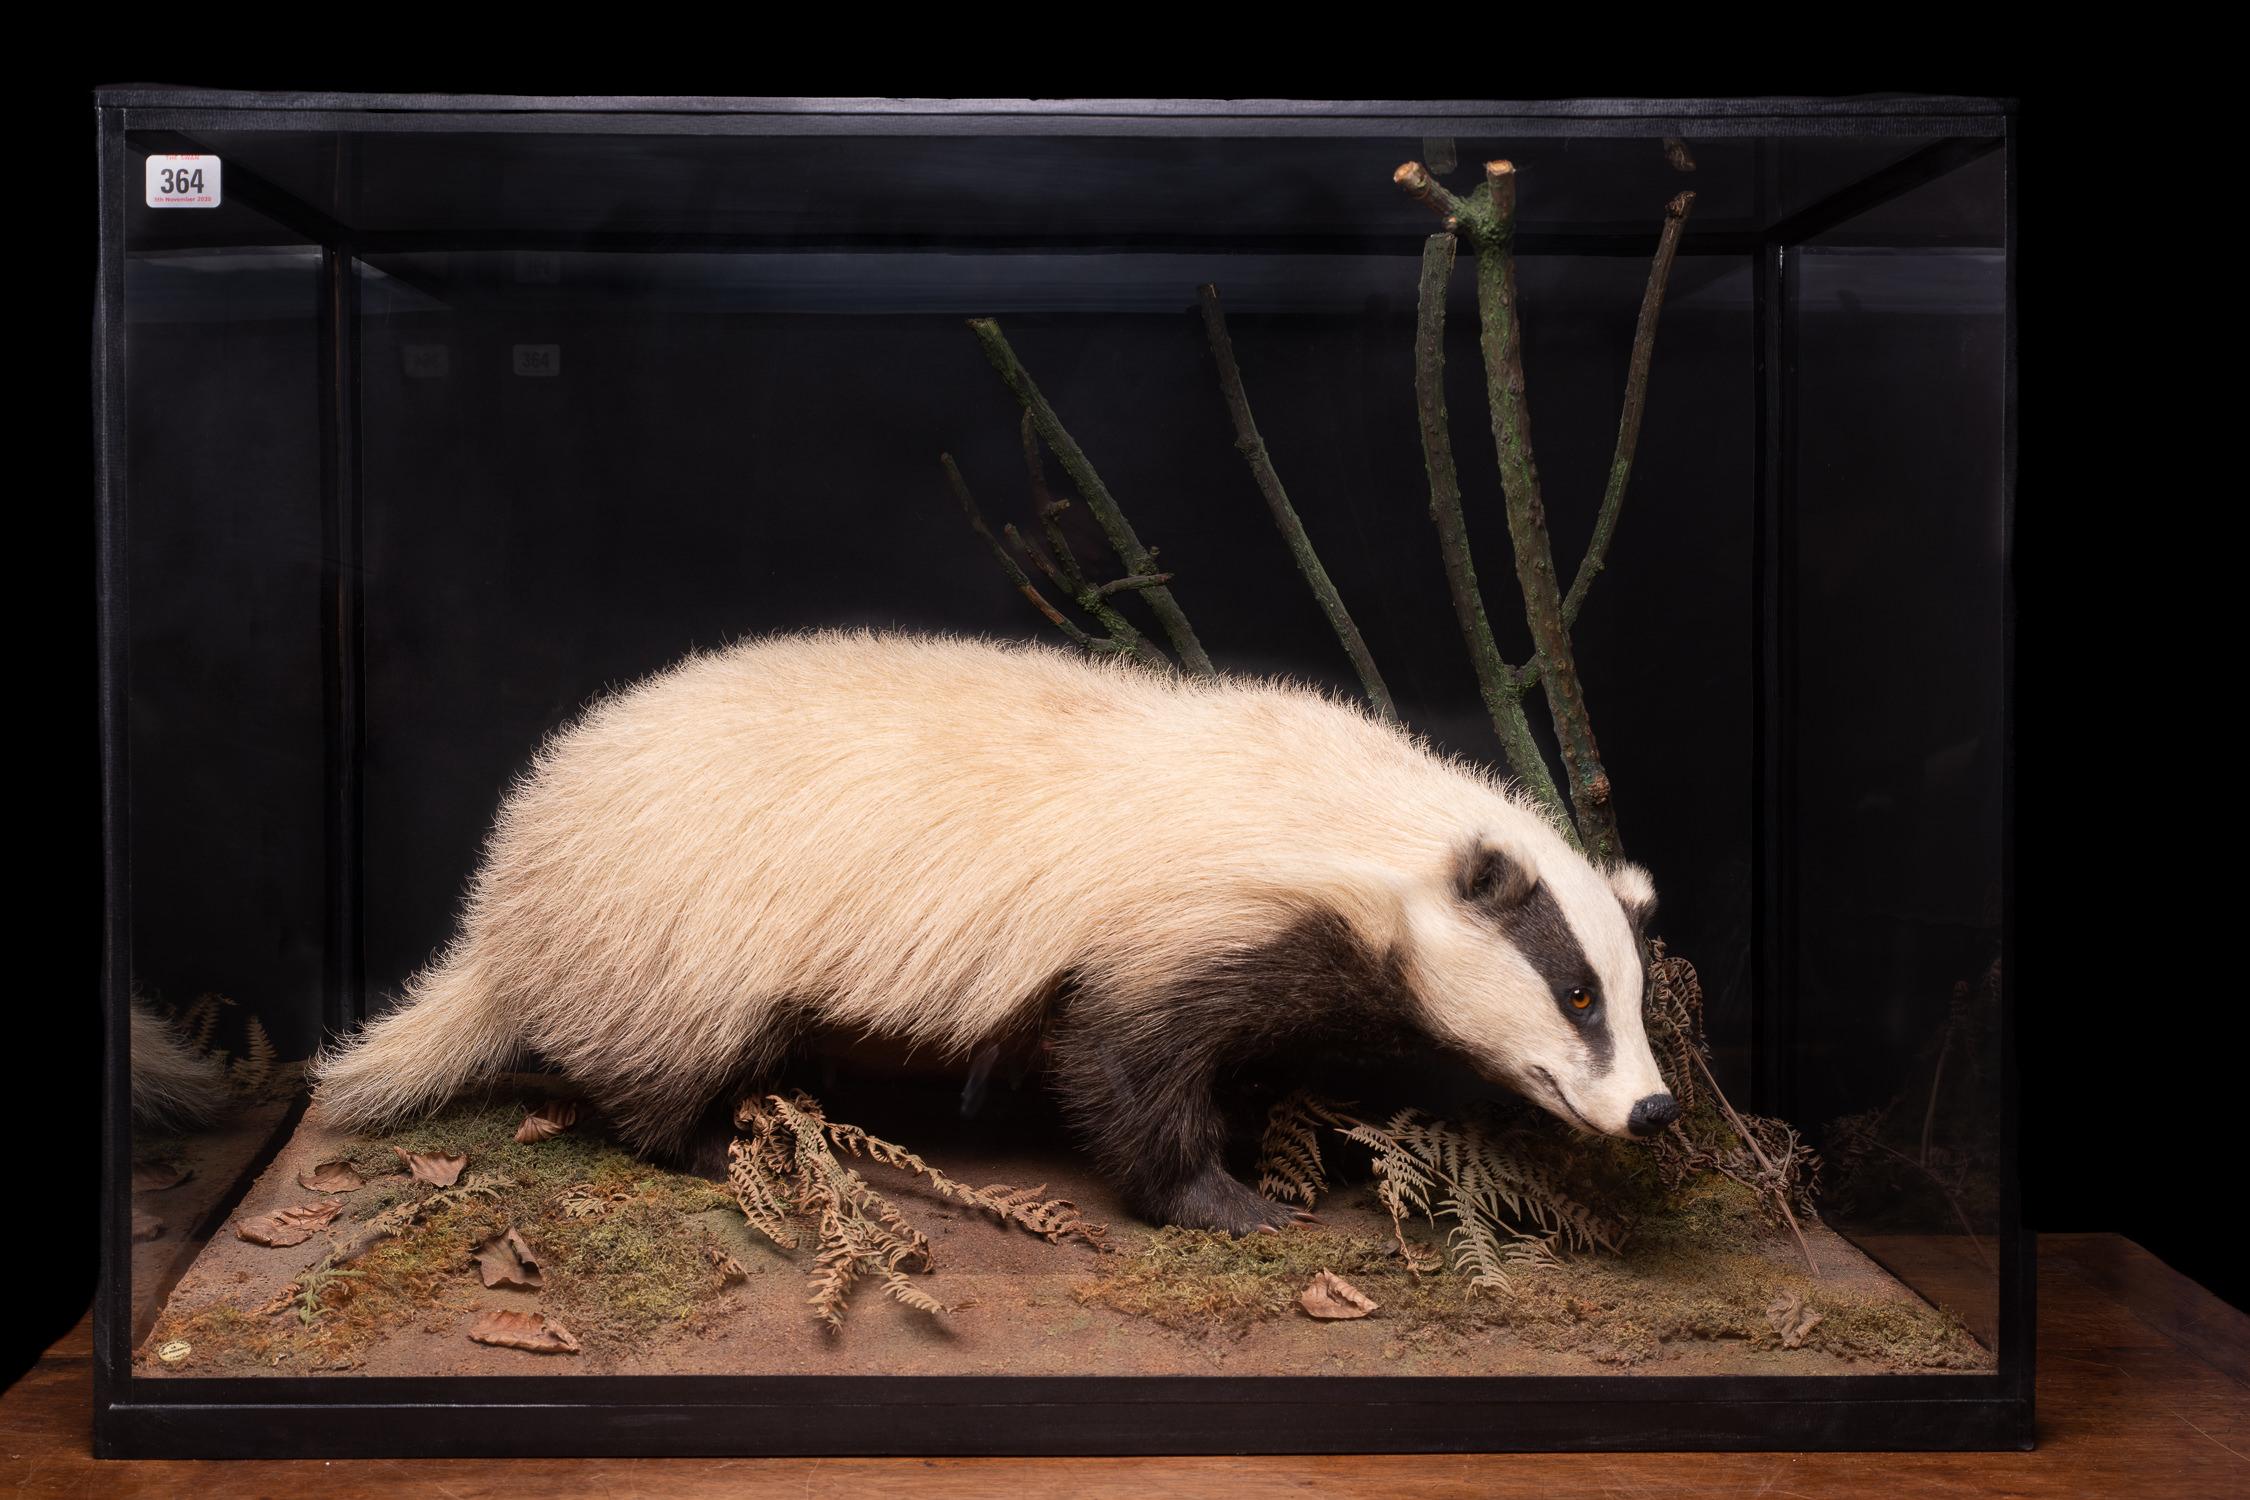 The badger is an omnivorous mammal with short legs for digging. He has an elongated, weasel-like head with small ears. This specimen is a European badger or Meles meles and is bigger than his American counterparts. The female badger in the showcase